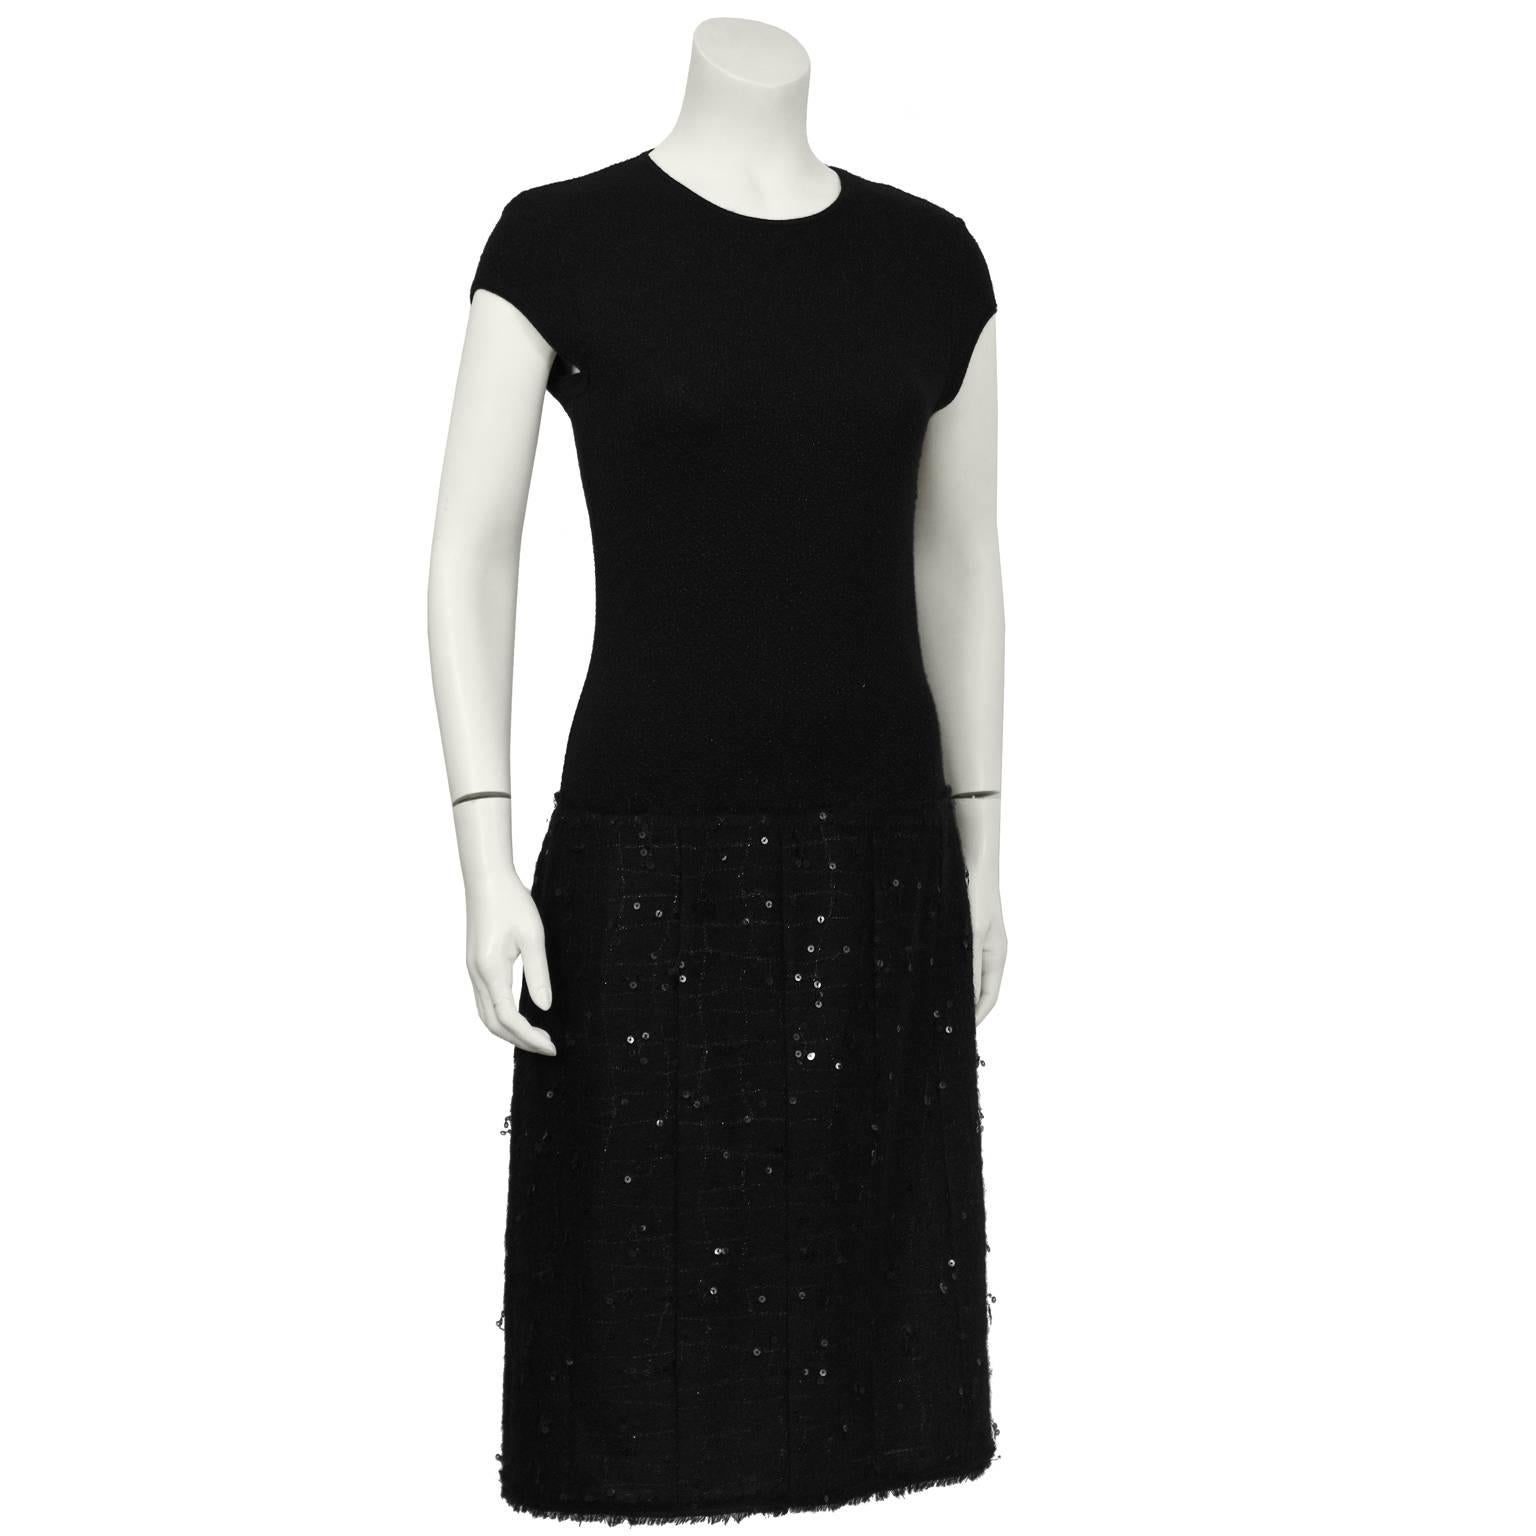 Fall 2004 Chanel black nylon/cashmere/silk blend dress and shawl. The dress features a cap sleeve and a drop waist giving the illusion of a separate skirt. The skirt is adorned with black sequins and gunmetal threading. Hidden zipper at the side and